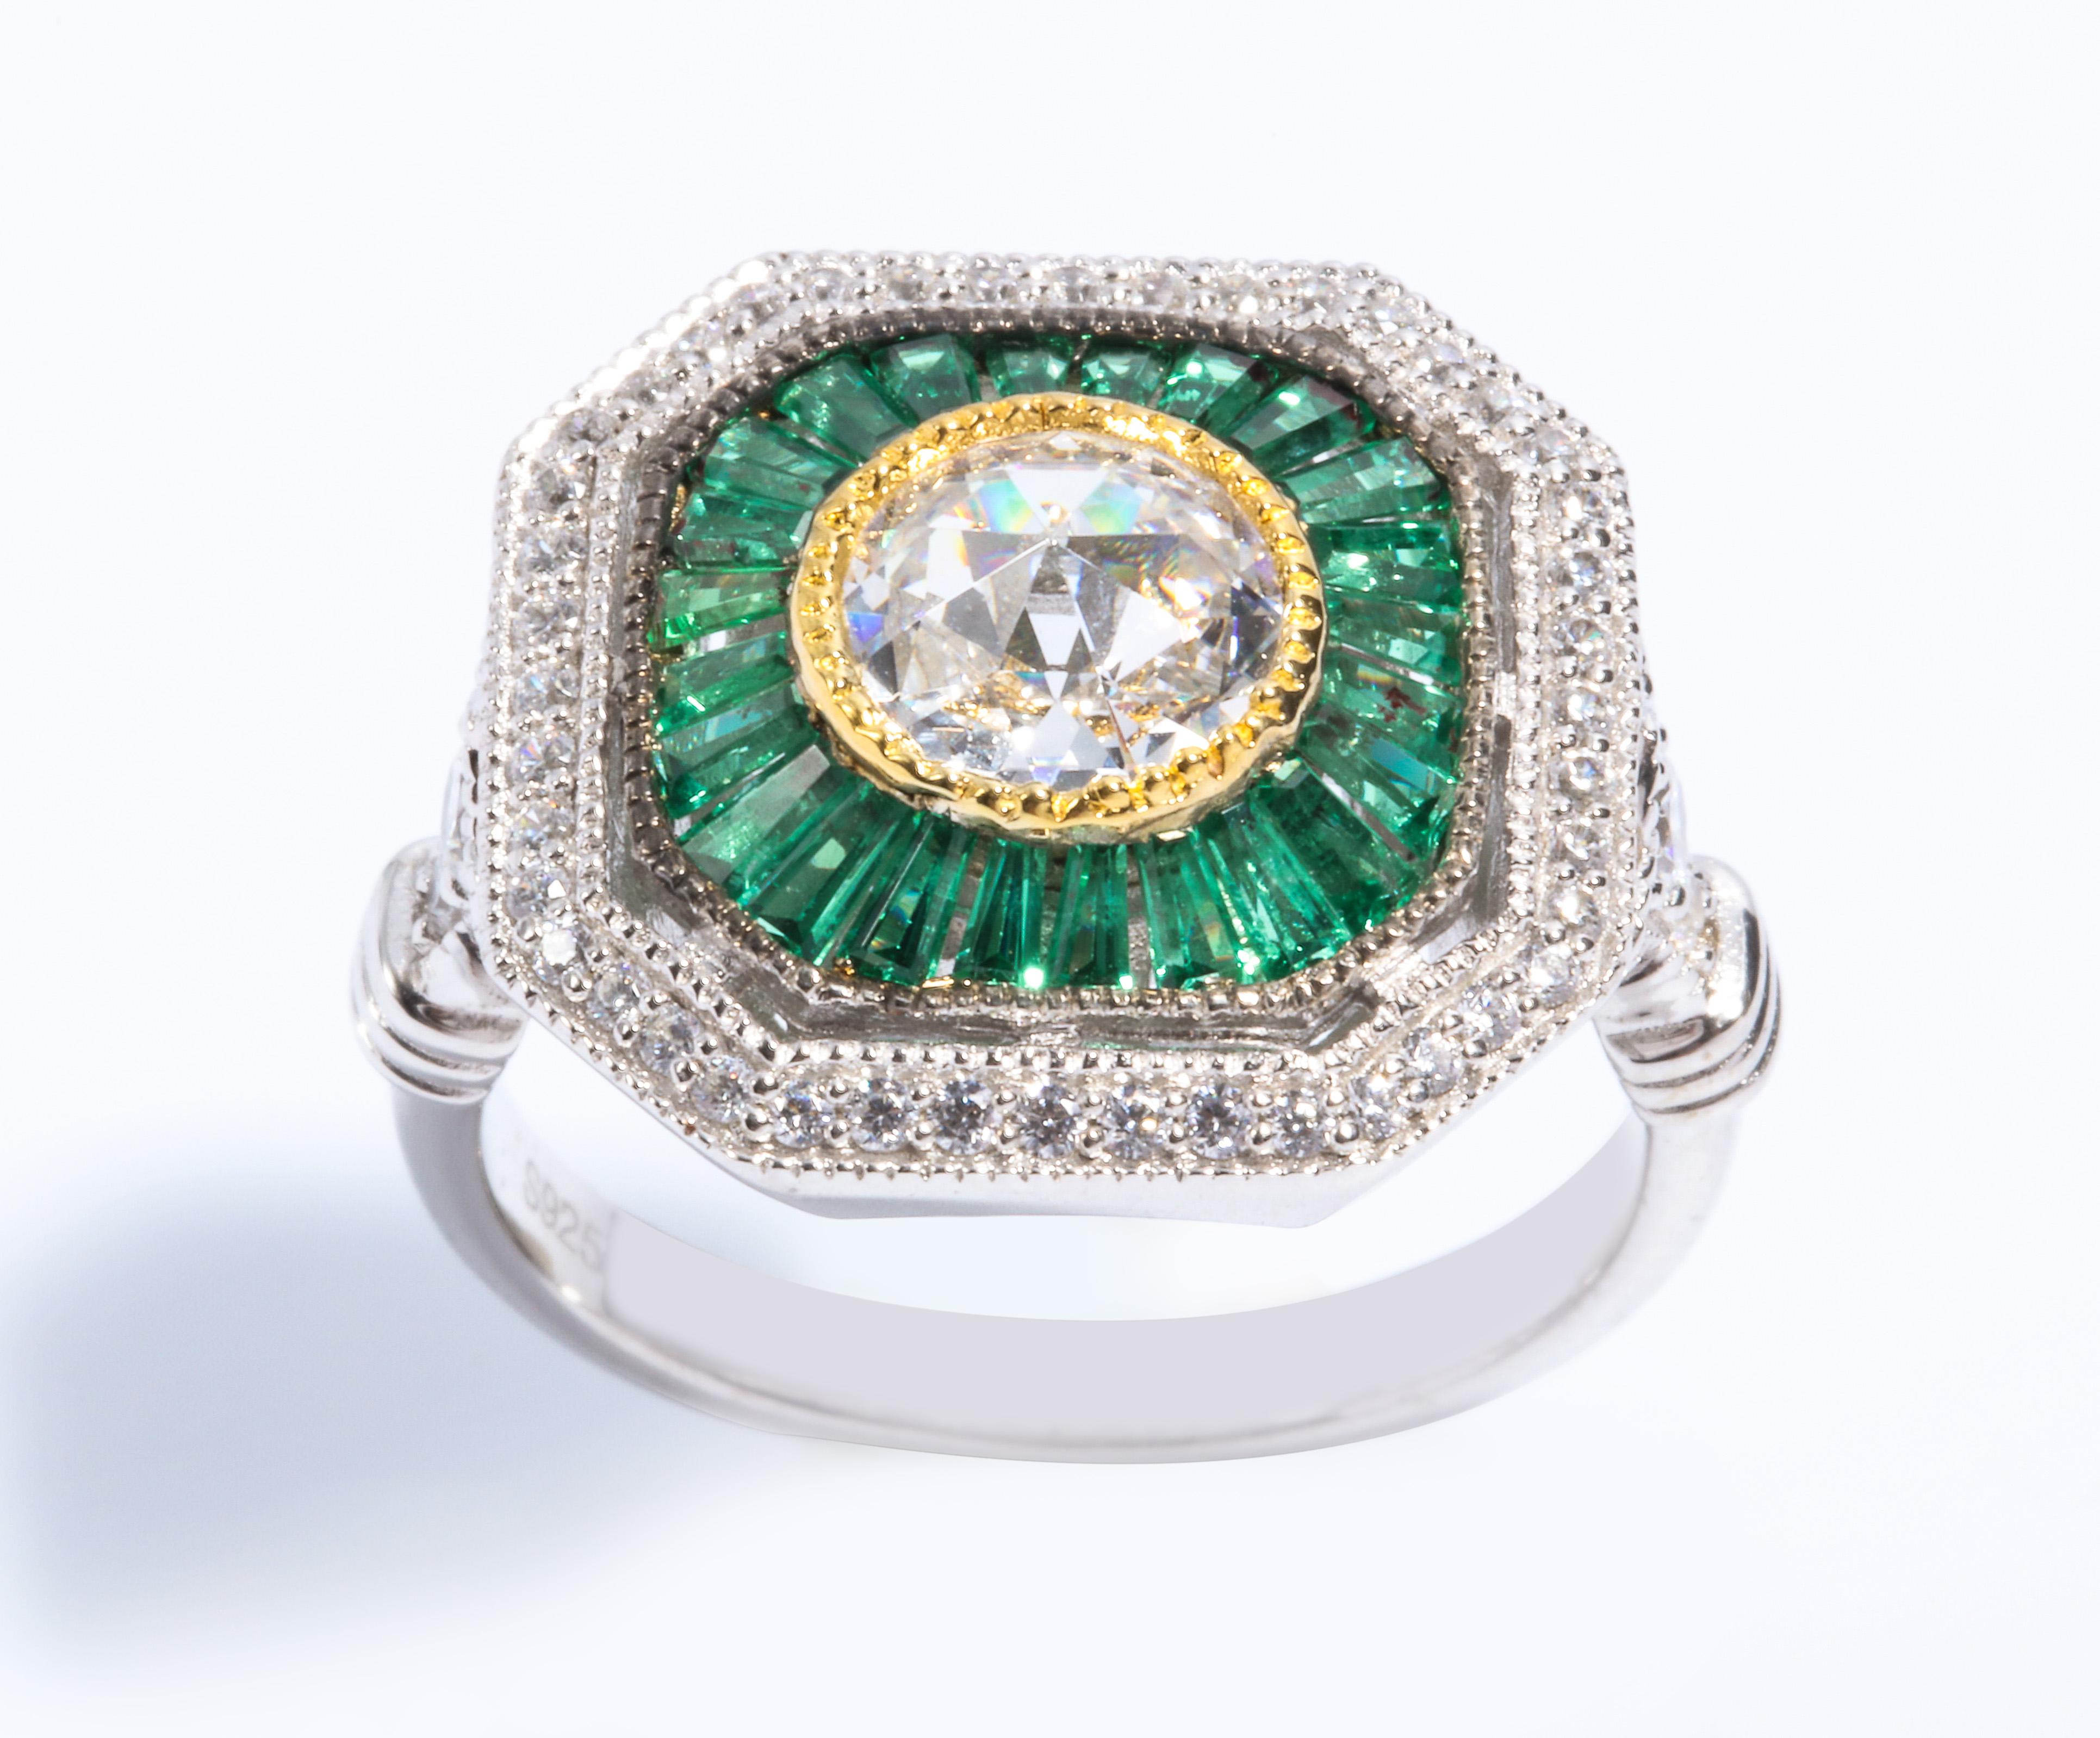 Magnificent Costume Jewelry Art Deco Style Diamond Emerald Sterling Ring set with a Round CZ Surrounded by Tapered Synthetic Baguette Emeralds set in non-tarnish Sterling free sizing.